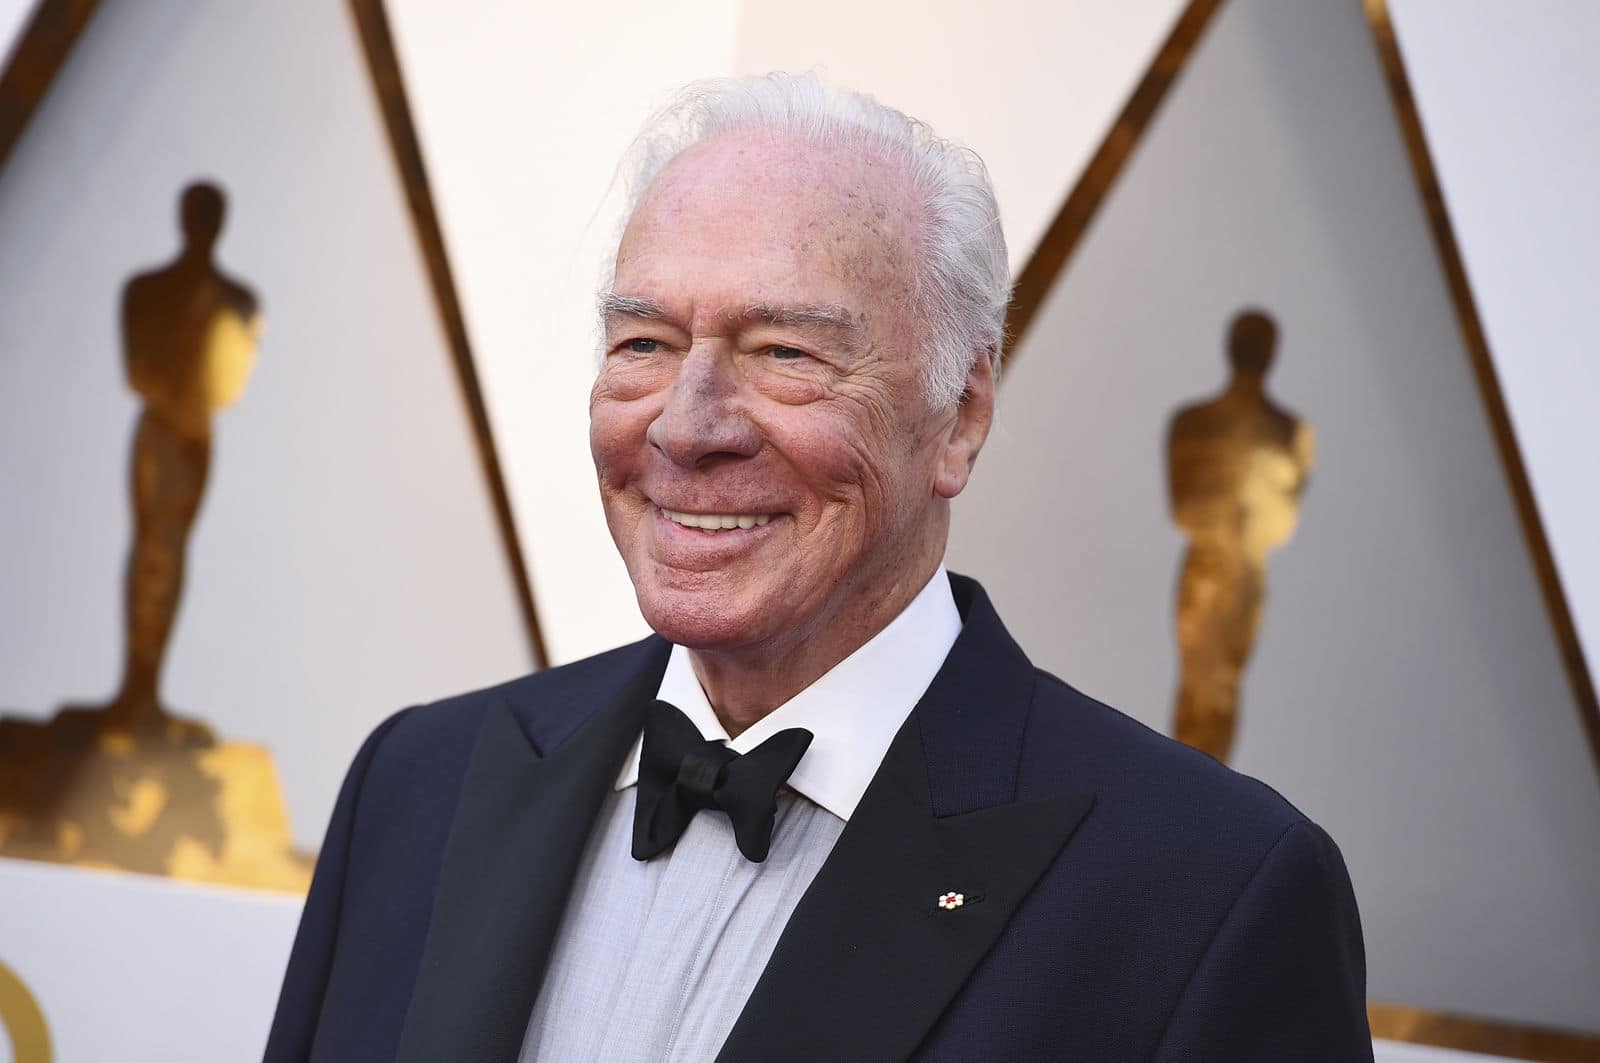 Christopher Plummer arrives at the Oscars on Sunday, March 4, 2018, at the Dolby Theatre in Los Angeles. (Photo by Jordan Strauss/Invision/AP)